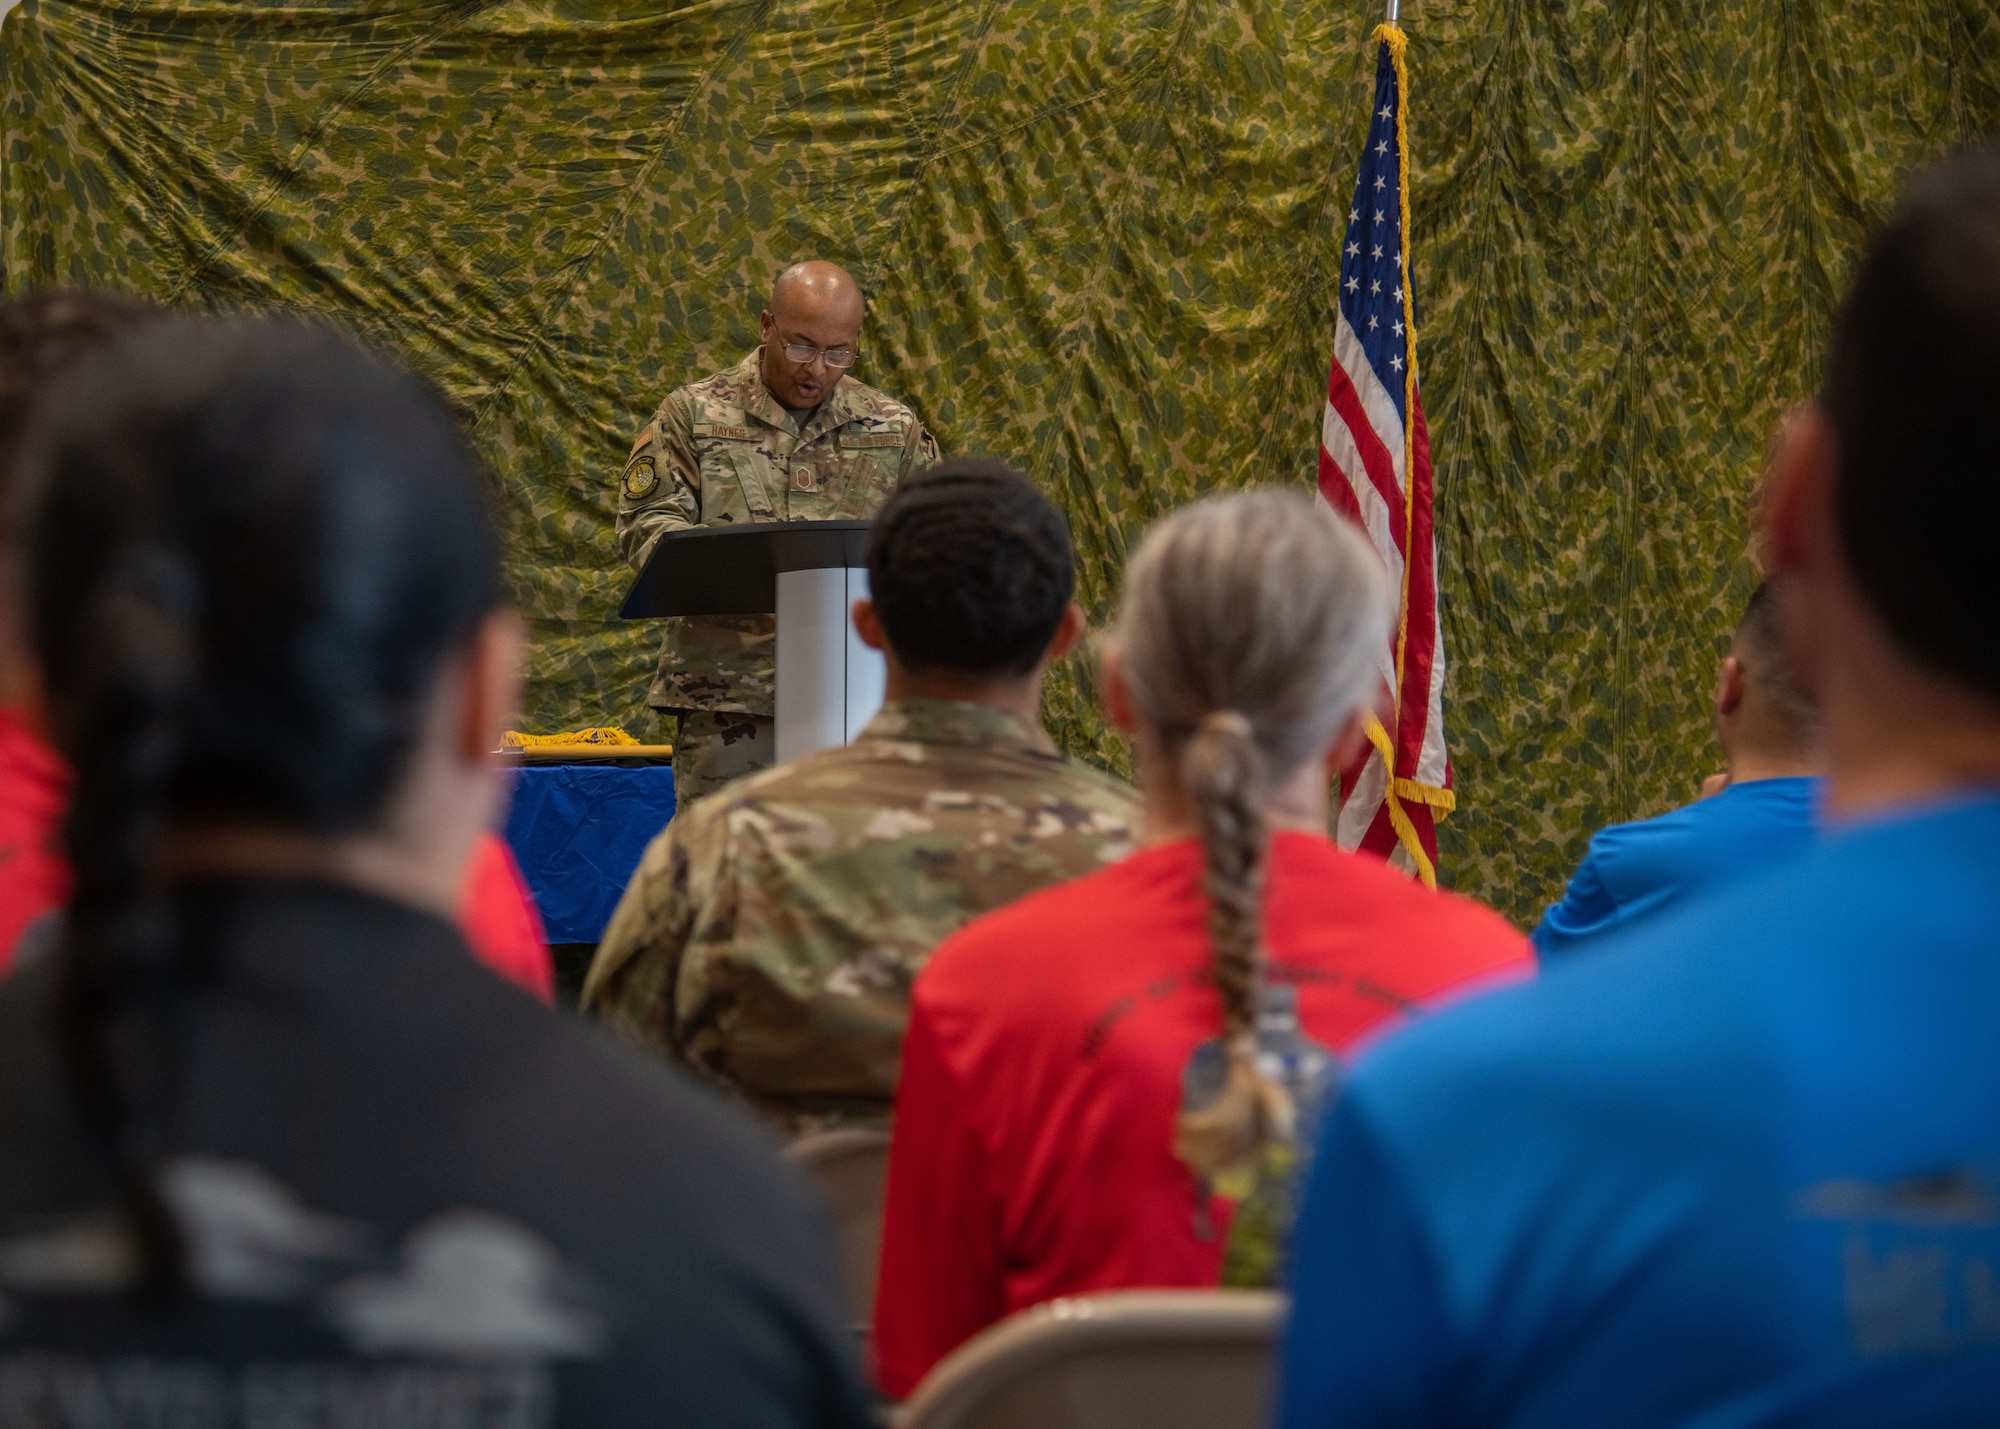 Senior Master Sgt. Edrick Haynes of the 41st Aerial Port Squadron at Keesler Air Force Base, Miss., makes opening remarks during the squadron’s first ever “Port Dawg Memorial Run” June 5, 2021. The air transportation community as a whole has held memorial runs for fallen members every year since 2013. (U.S. Air Force Photo by Staff Sgt. Kristen Pittman)